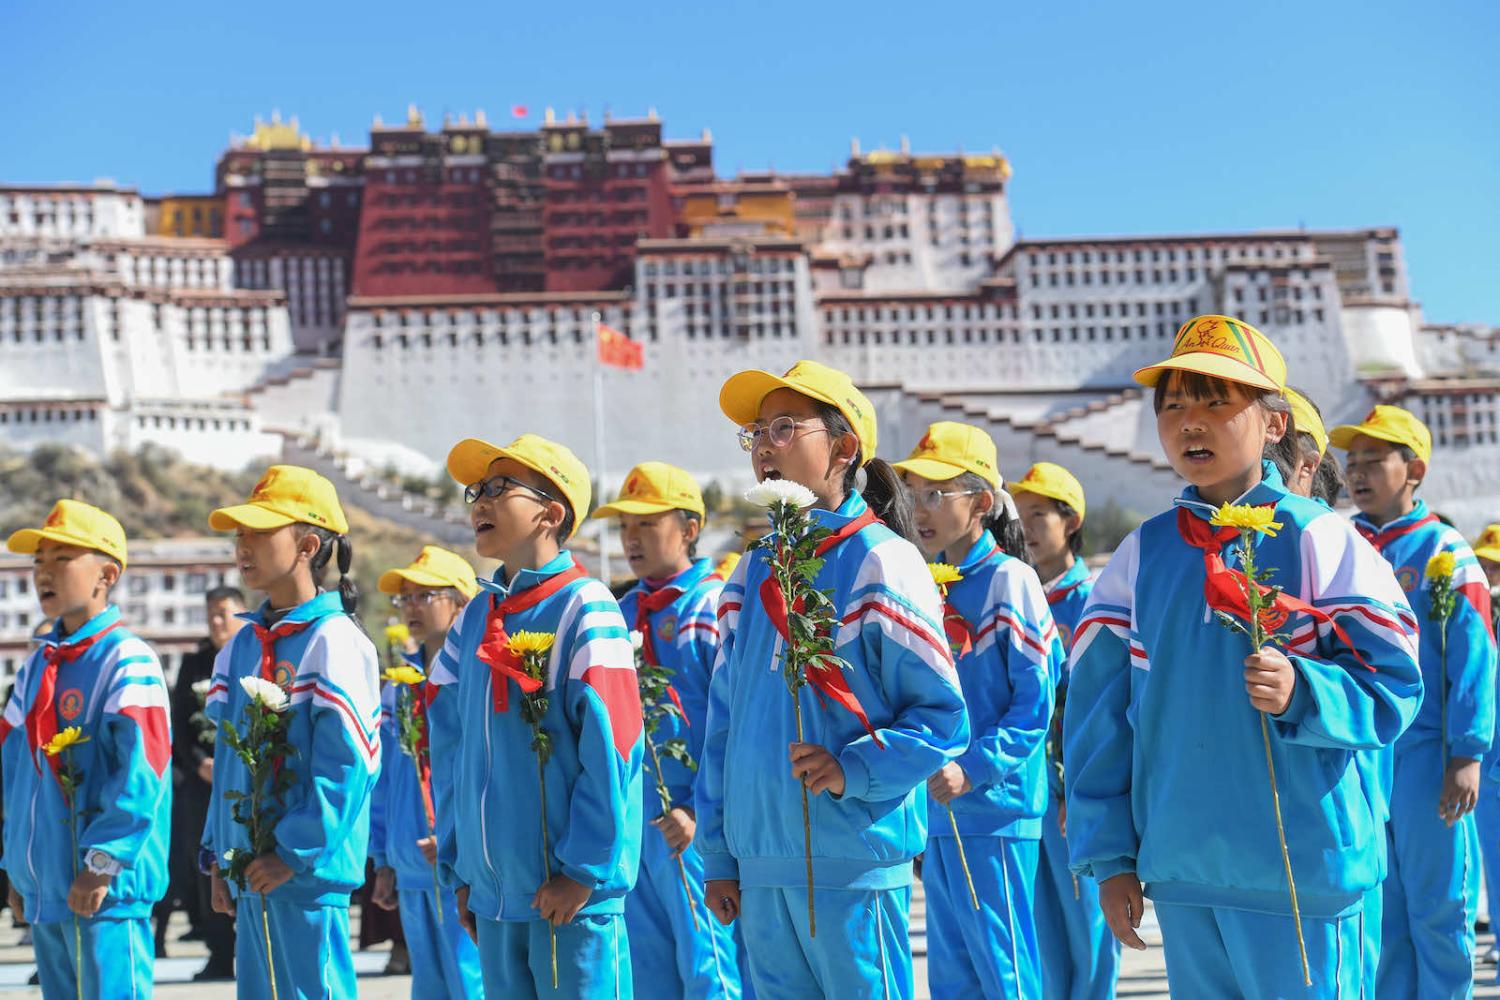 Students sing to mark the 70th anniversary of the “peaceful liberation” of Tibet, 23 May in Lhasa (Photo by Gongga Laisong/China News Service via Getty Images